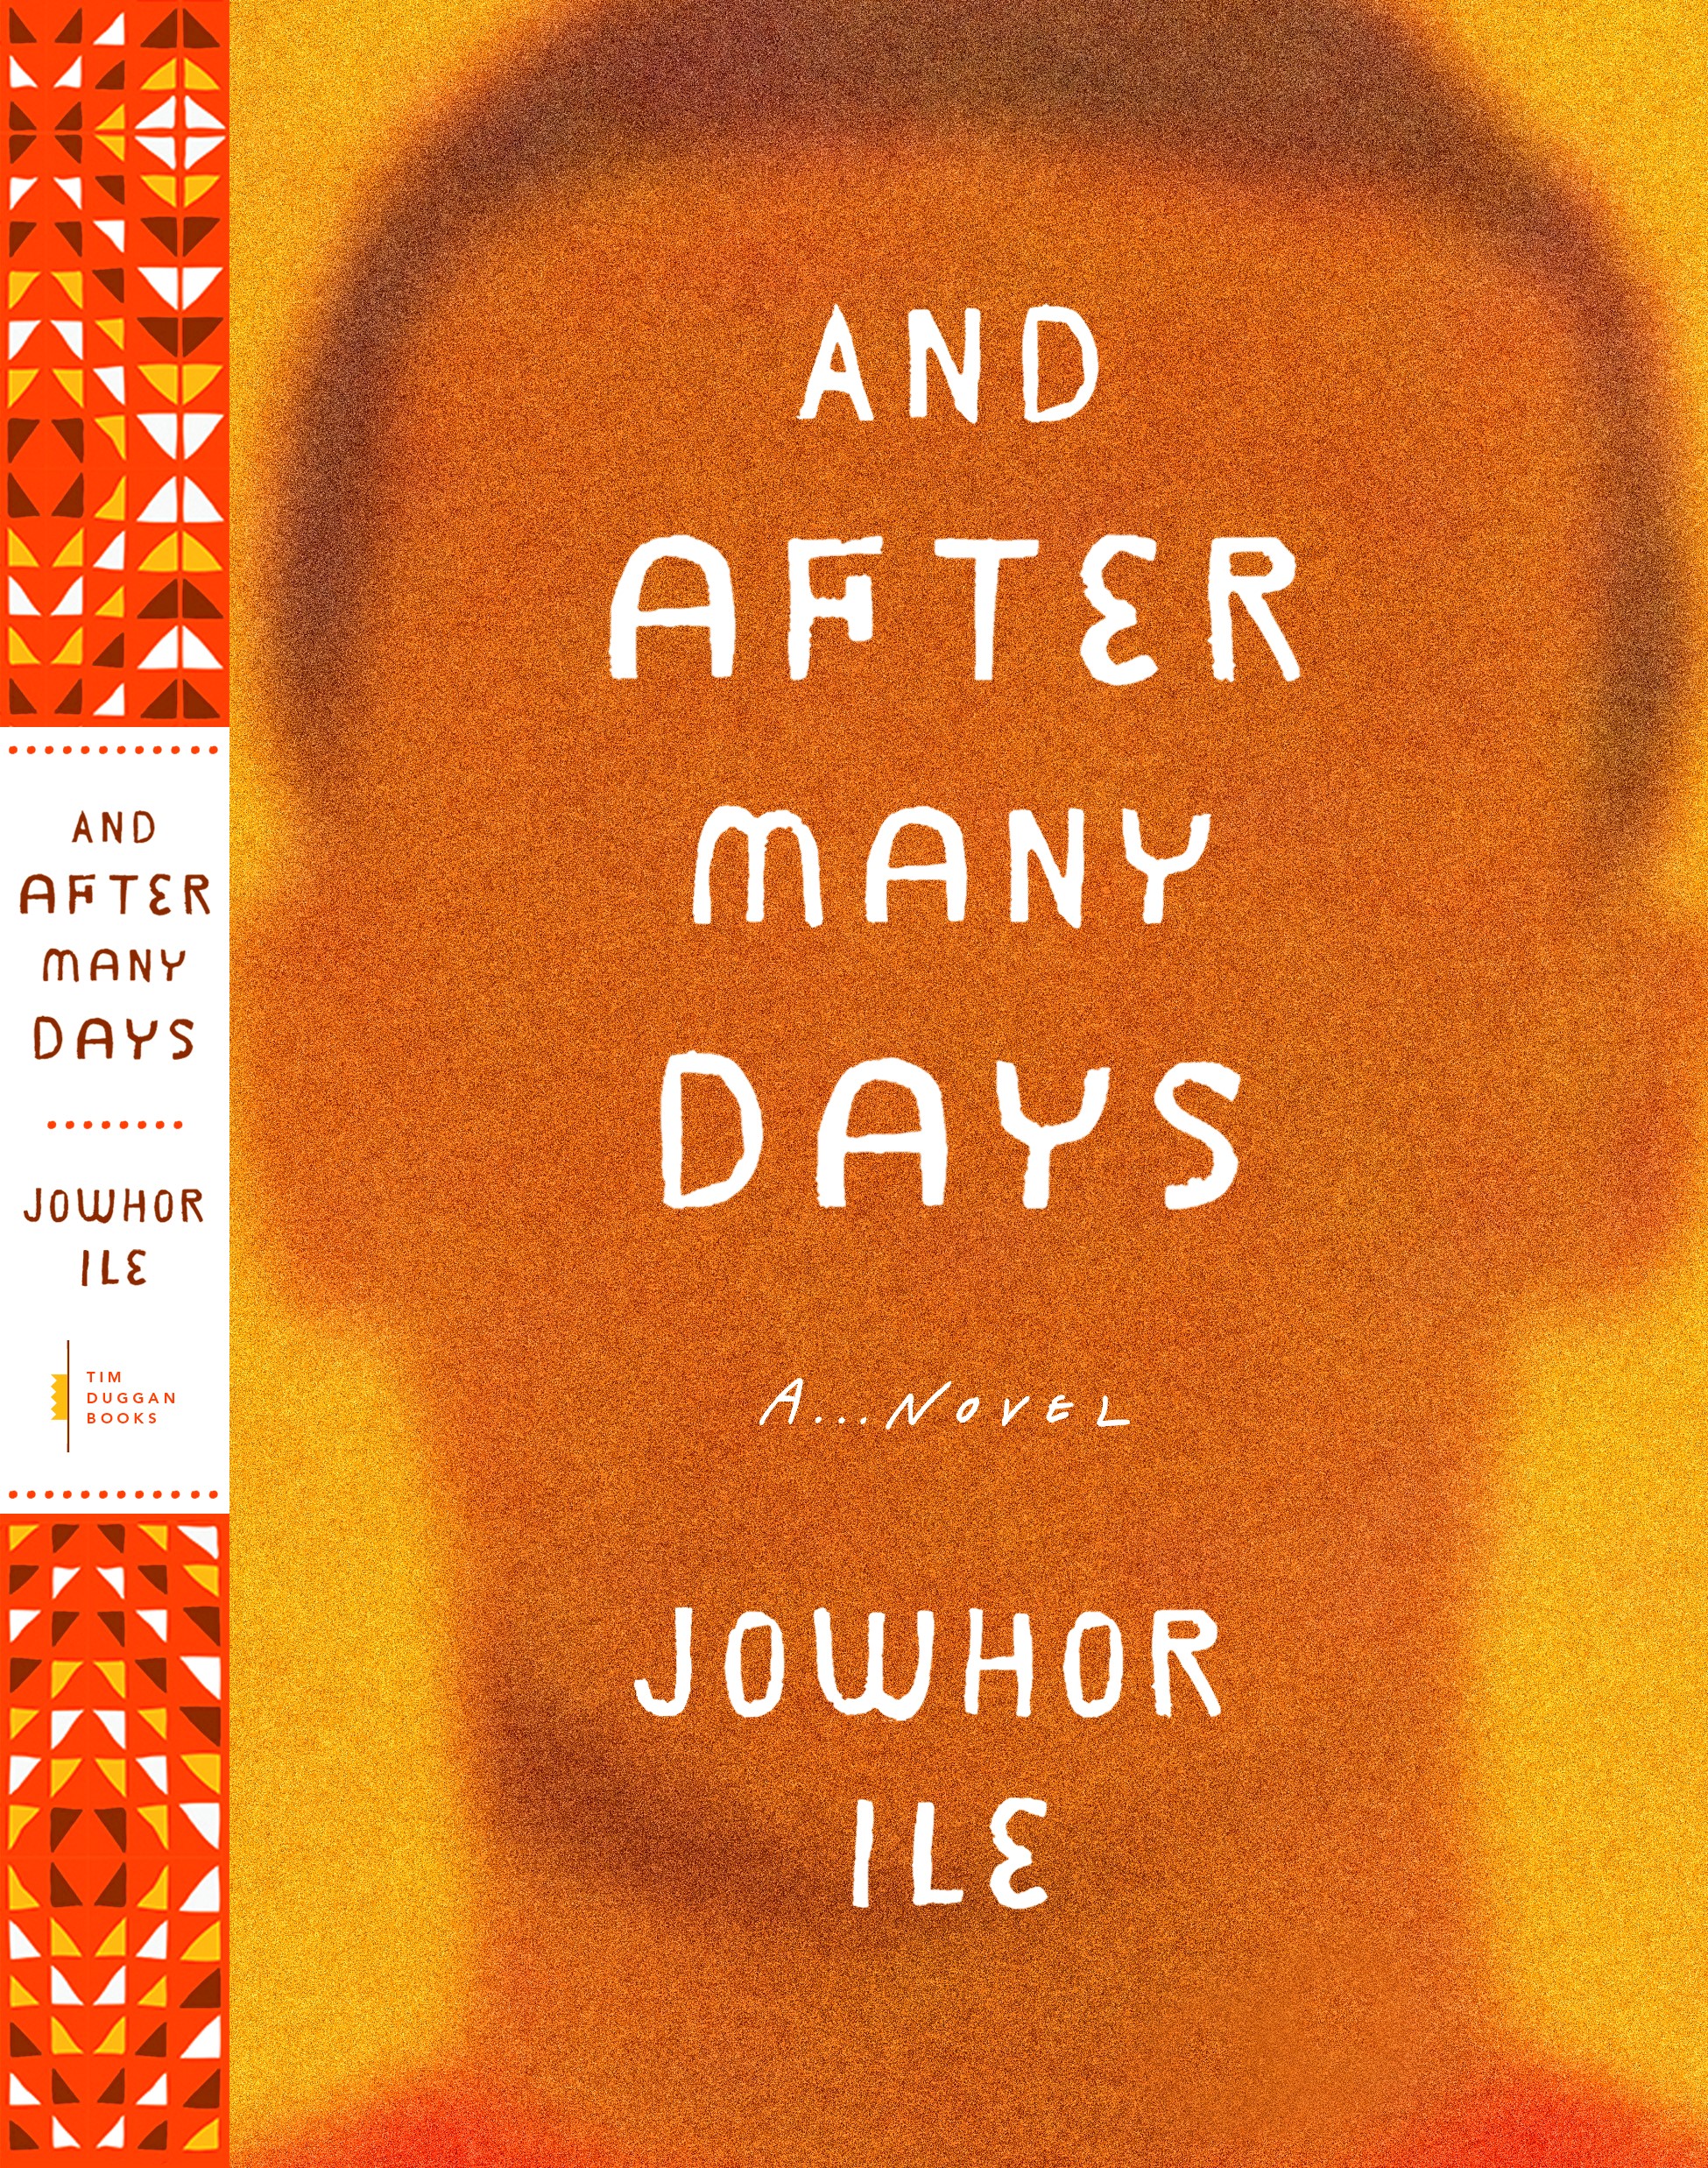 Image of the book "and after many days"